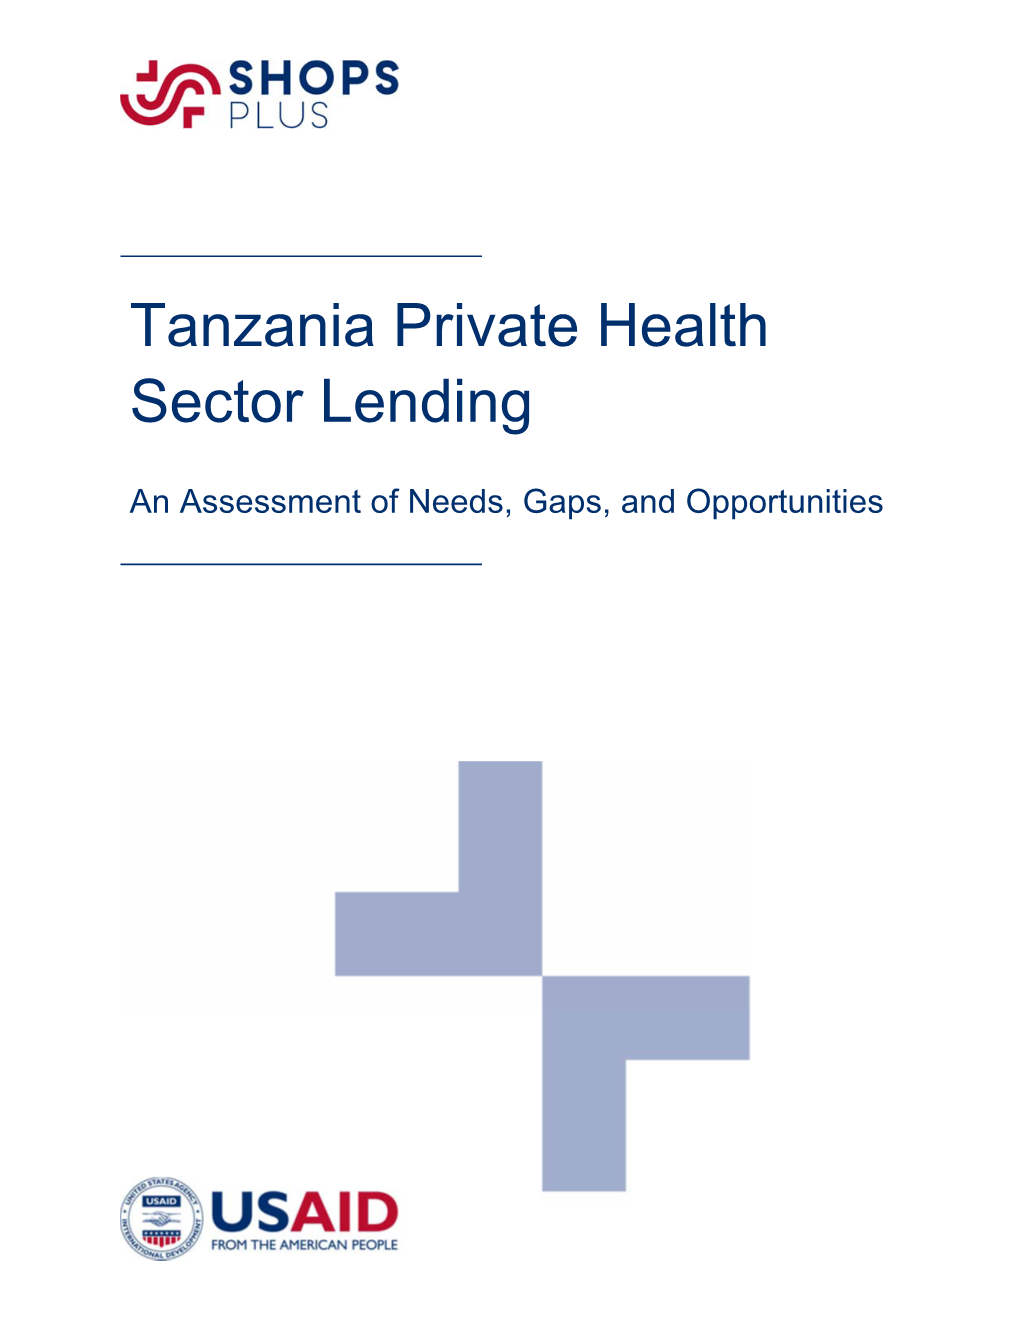 Tanzania Private Health Sector Lending: an Assessment of Needs, Gaps, and Opportunities